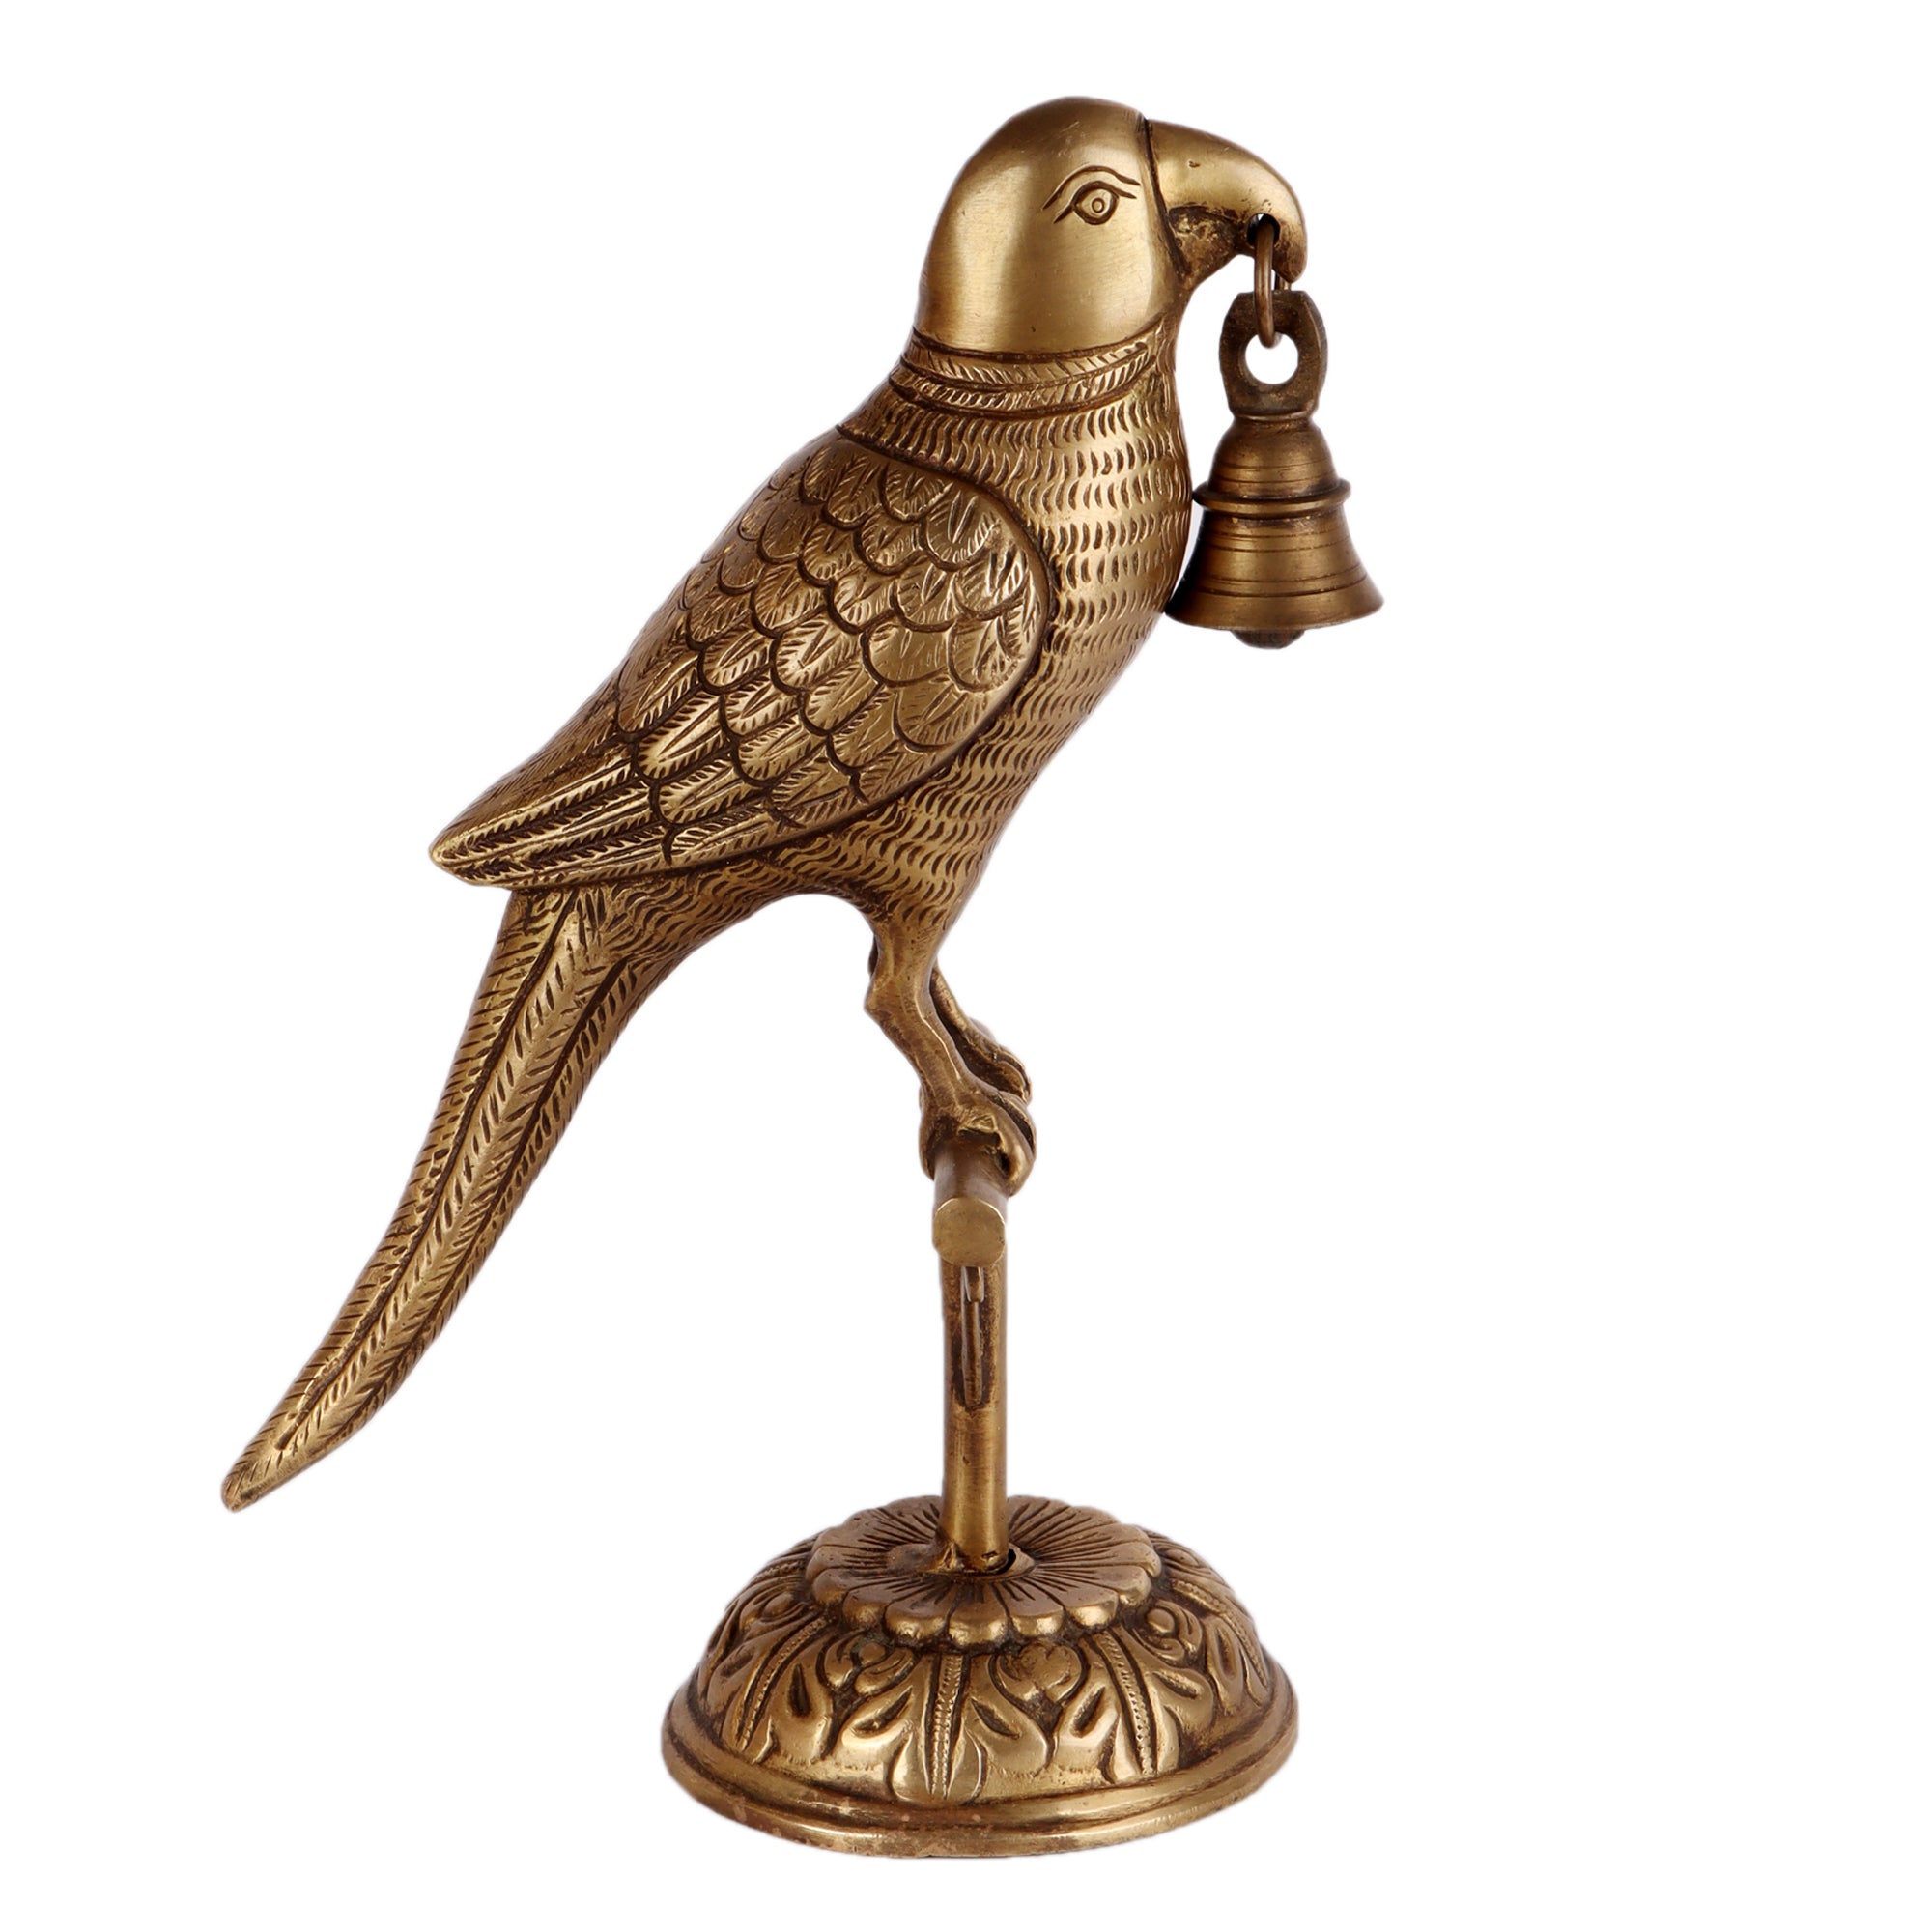 The Parrot Bell